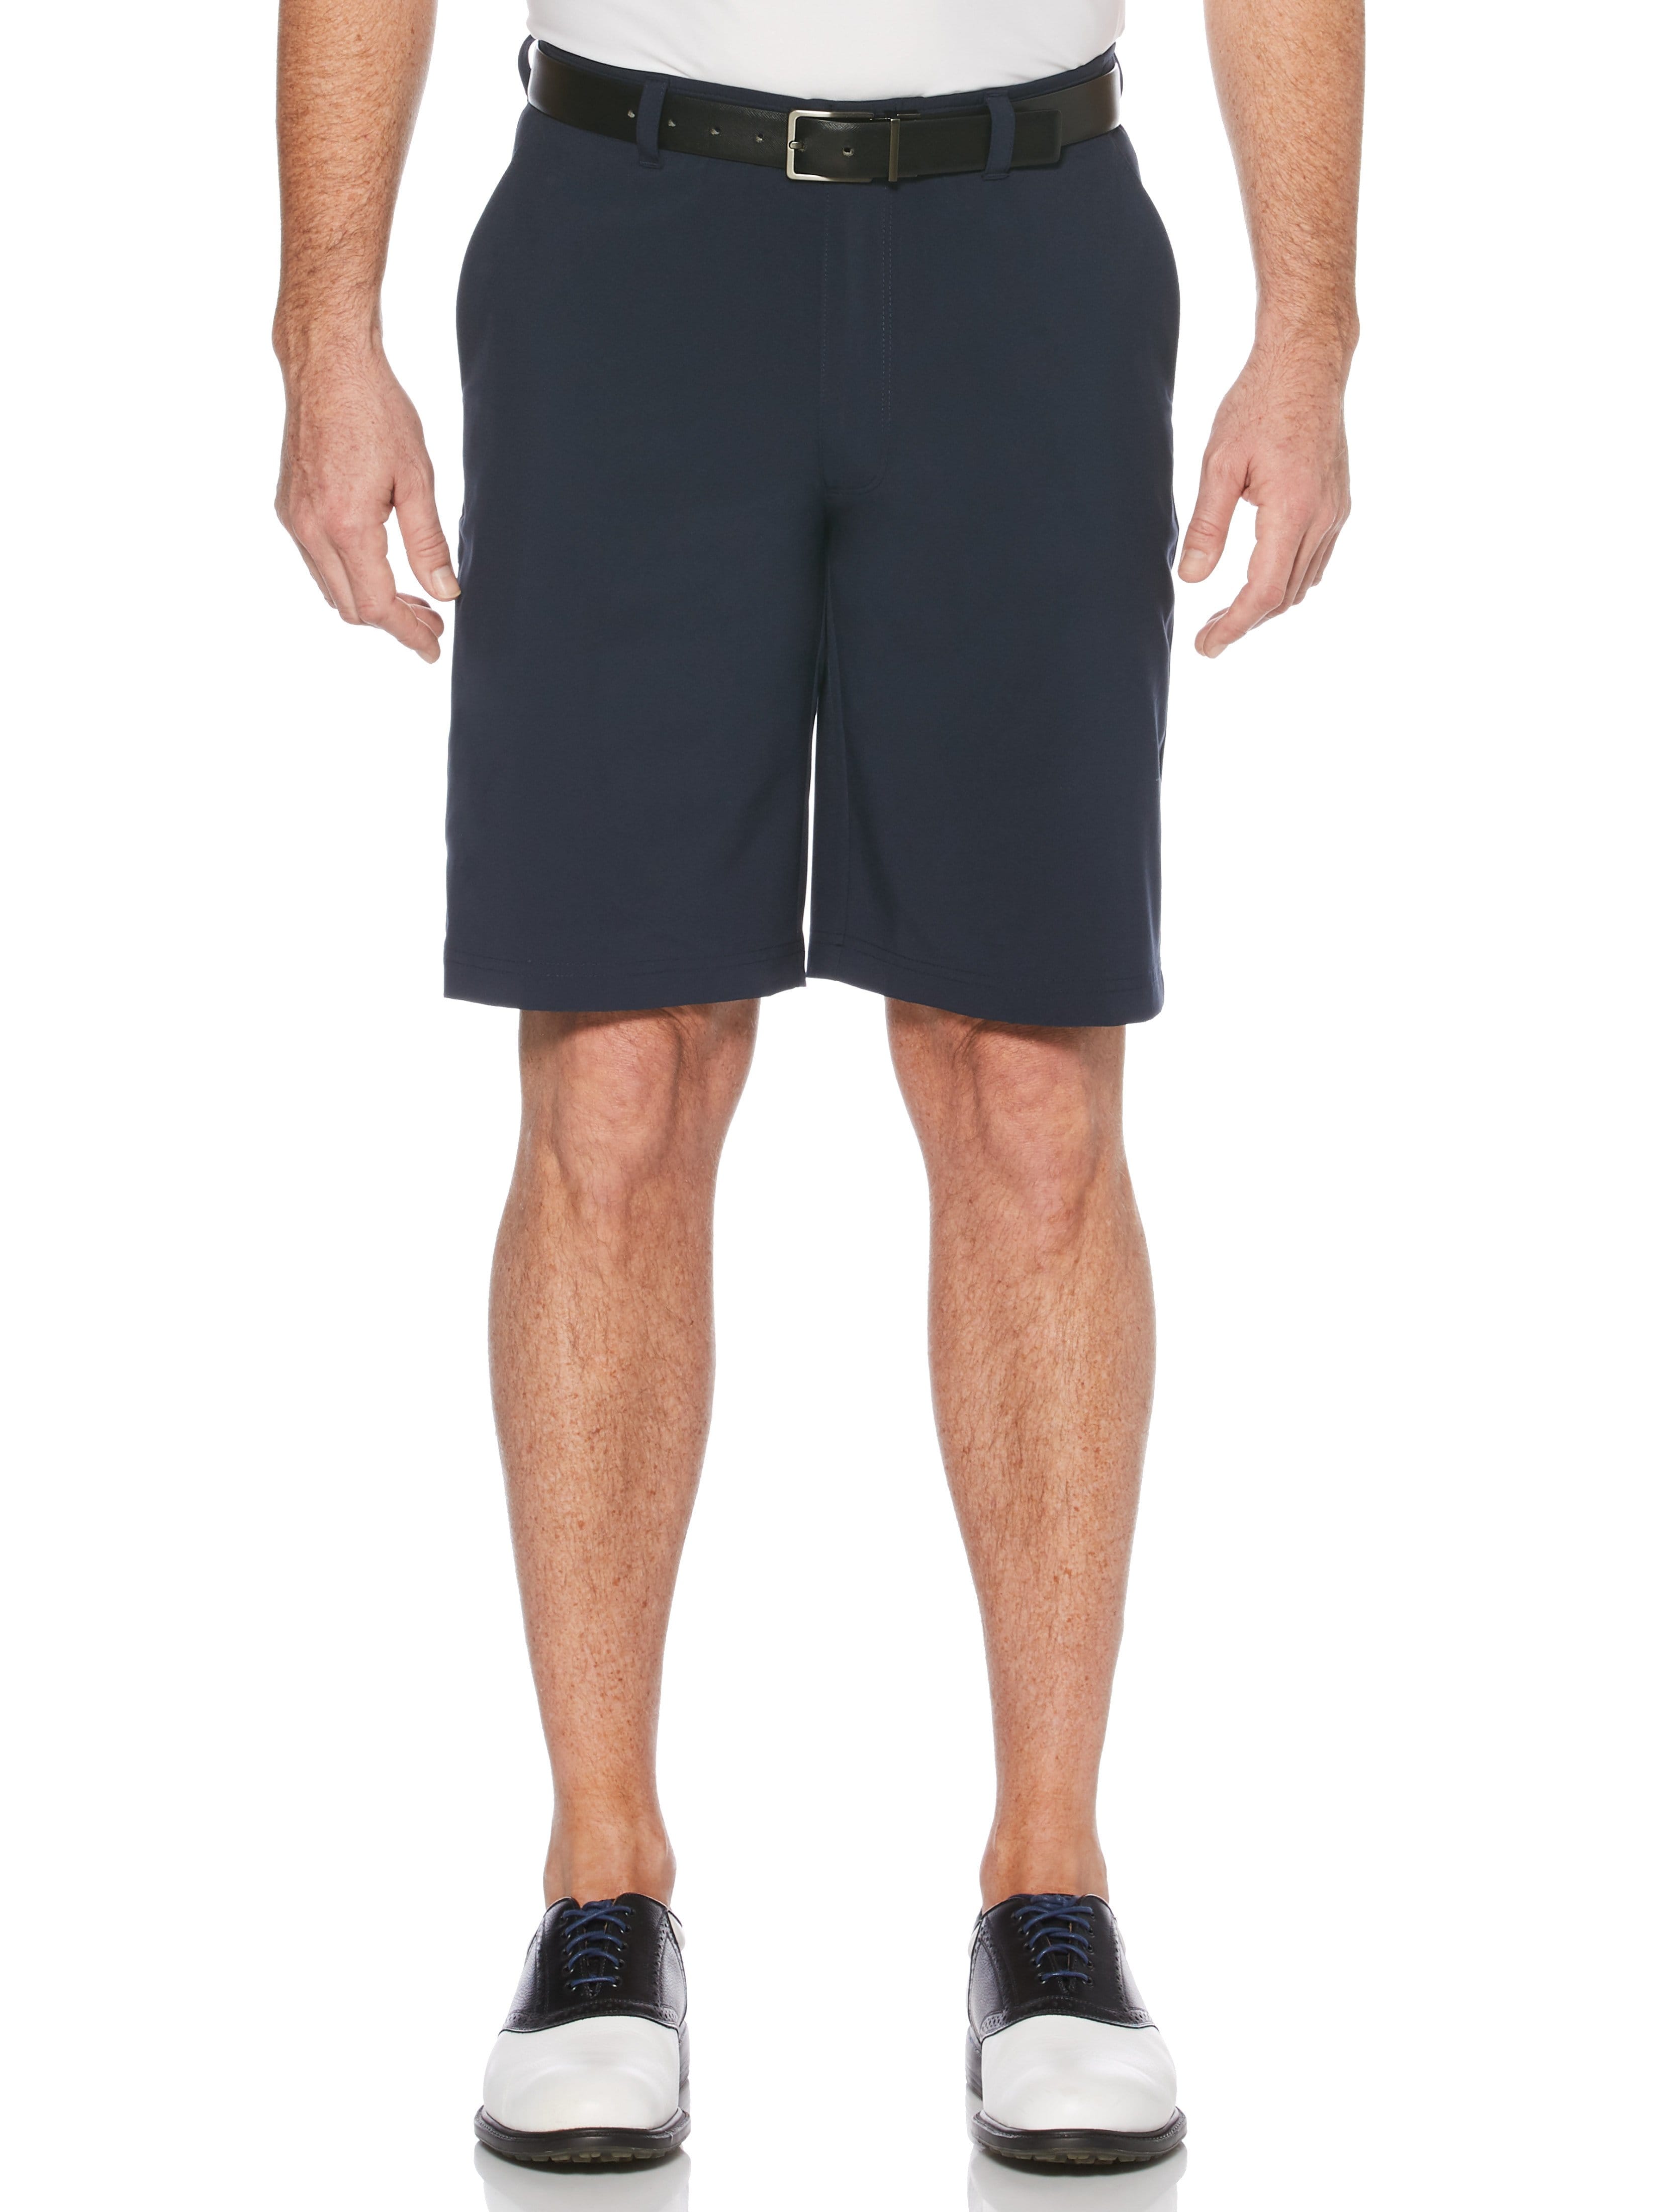 Jack Nicklaus Mens Flat Front Solid Golf Shorts w/ Active Waistband and Media Pocket, Size 30, Classic Navy Blue, Polyester/Elastane